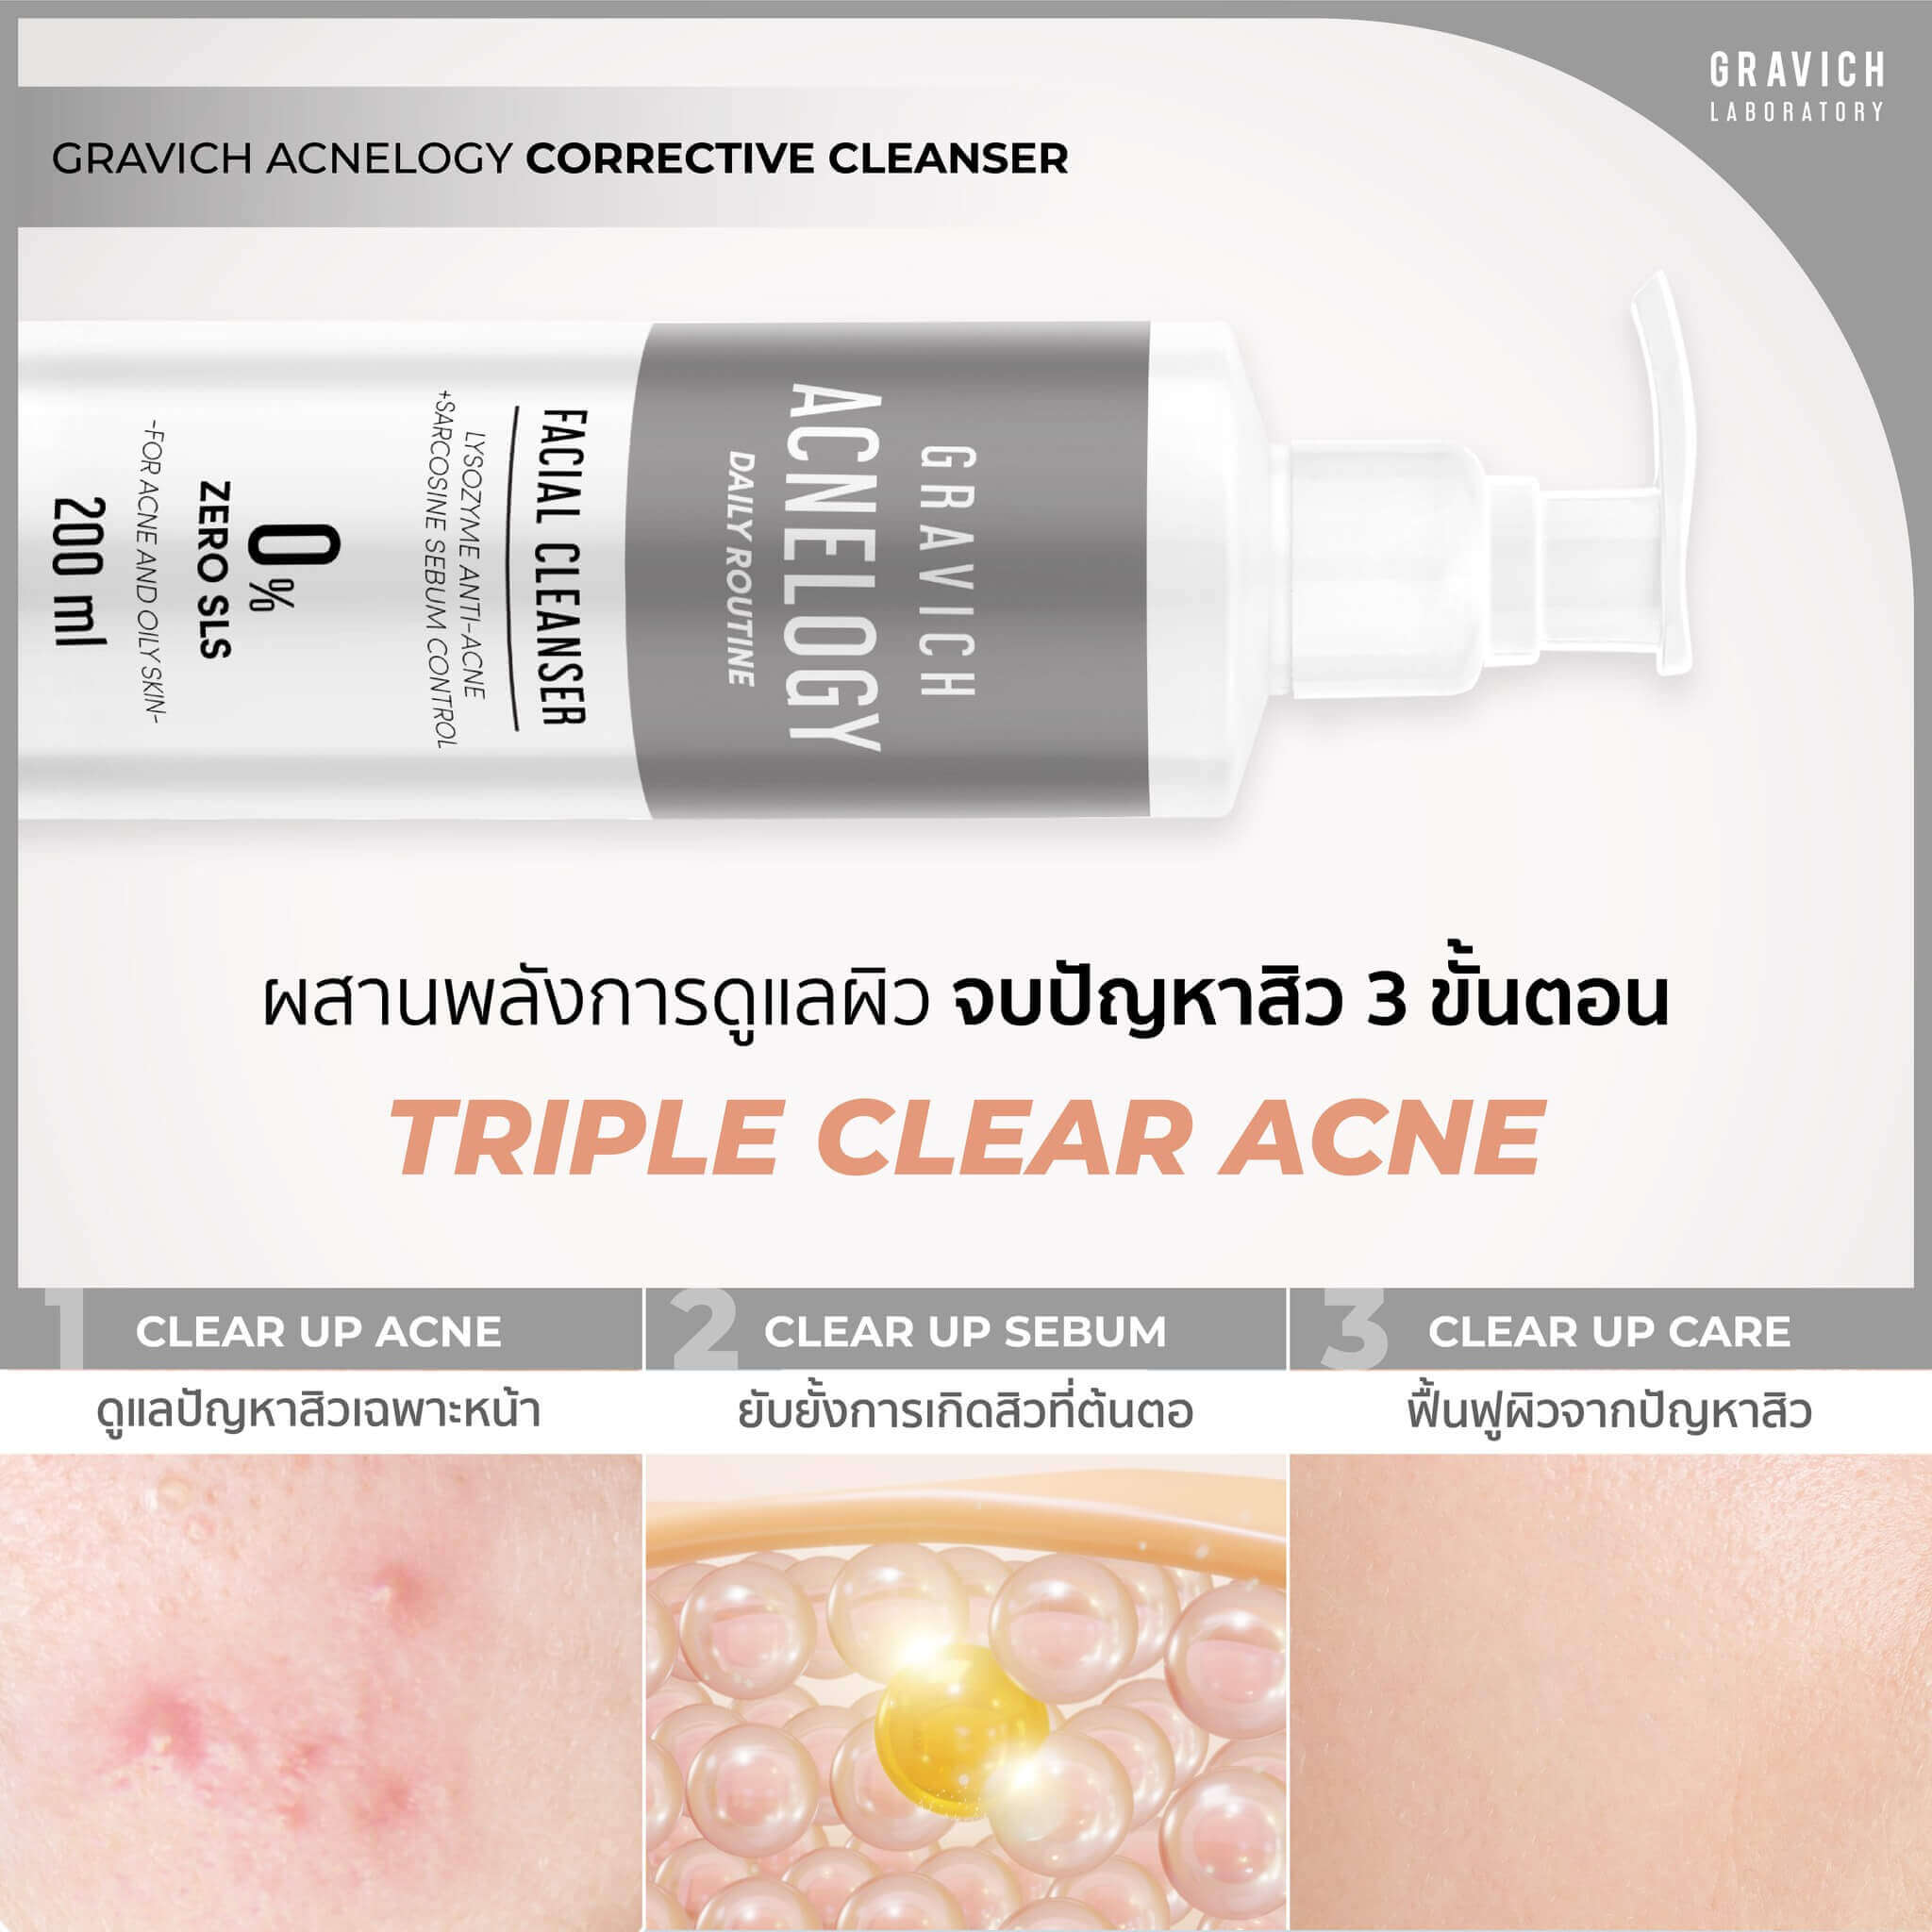 Gravich,Acnelogy Corrective Facial Cleanser,Cleanser,เจลล้างหน้า,คลีนเซอร์